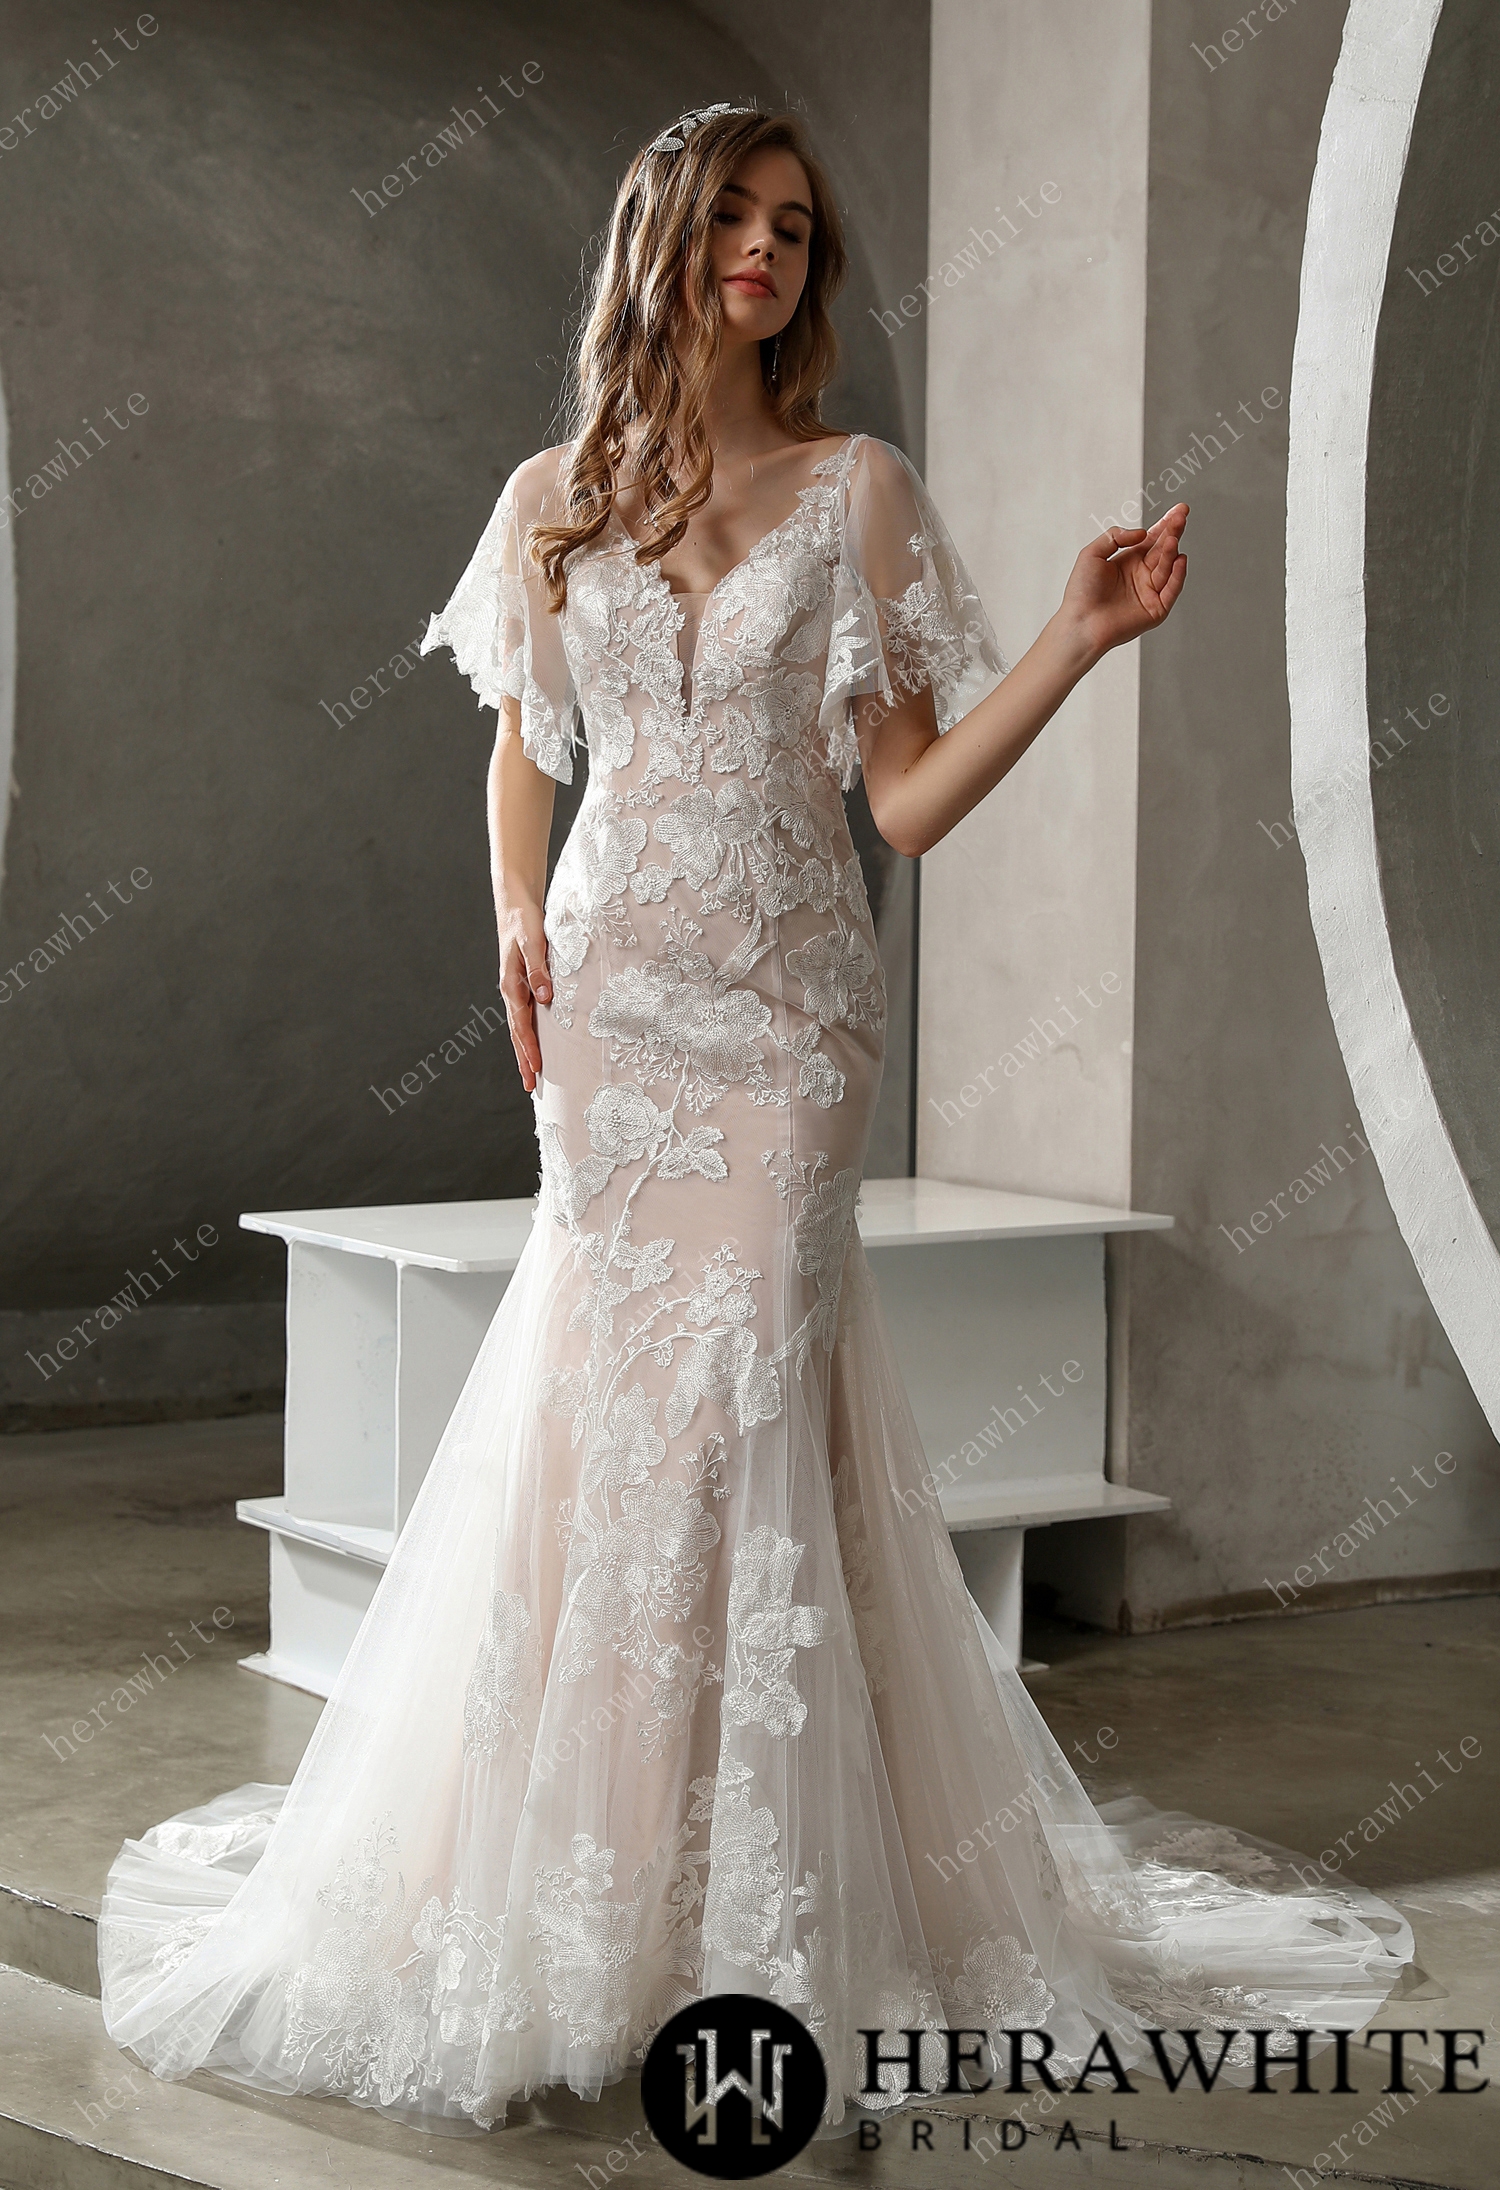 In Stock/ Floral Lace Plunging V-neck Bridal Gown with Flutter Sleeves